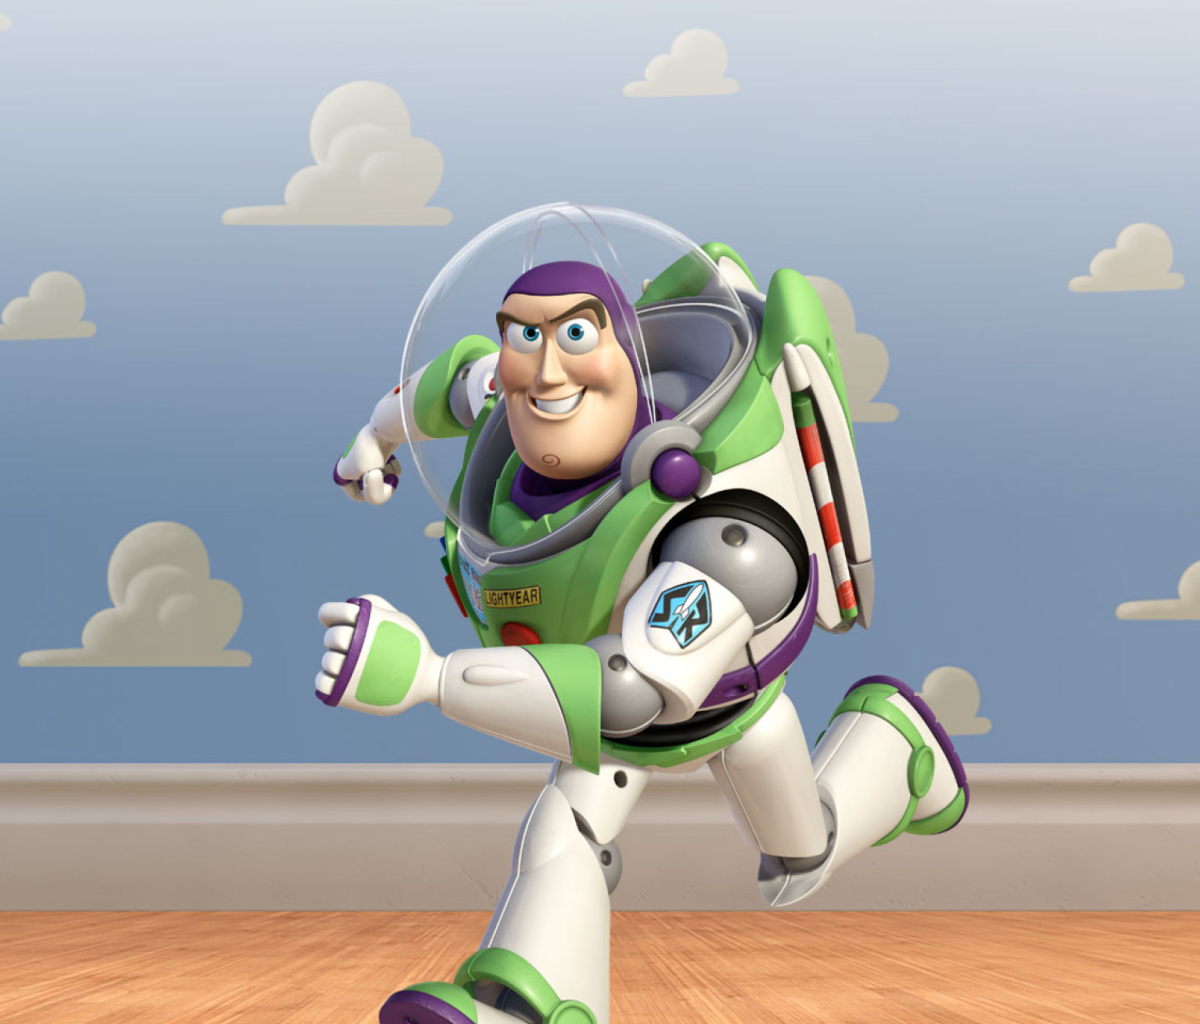 Toy Story wallpaper 1200x1024